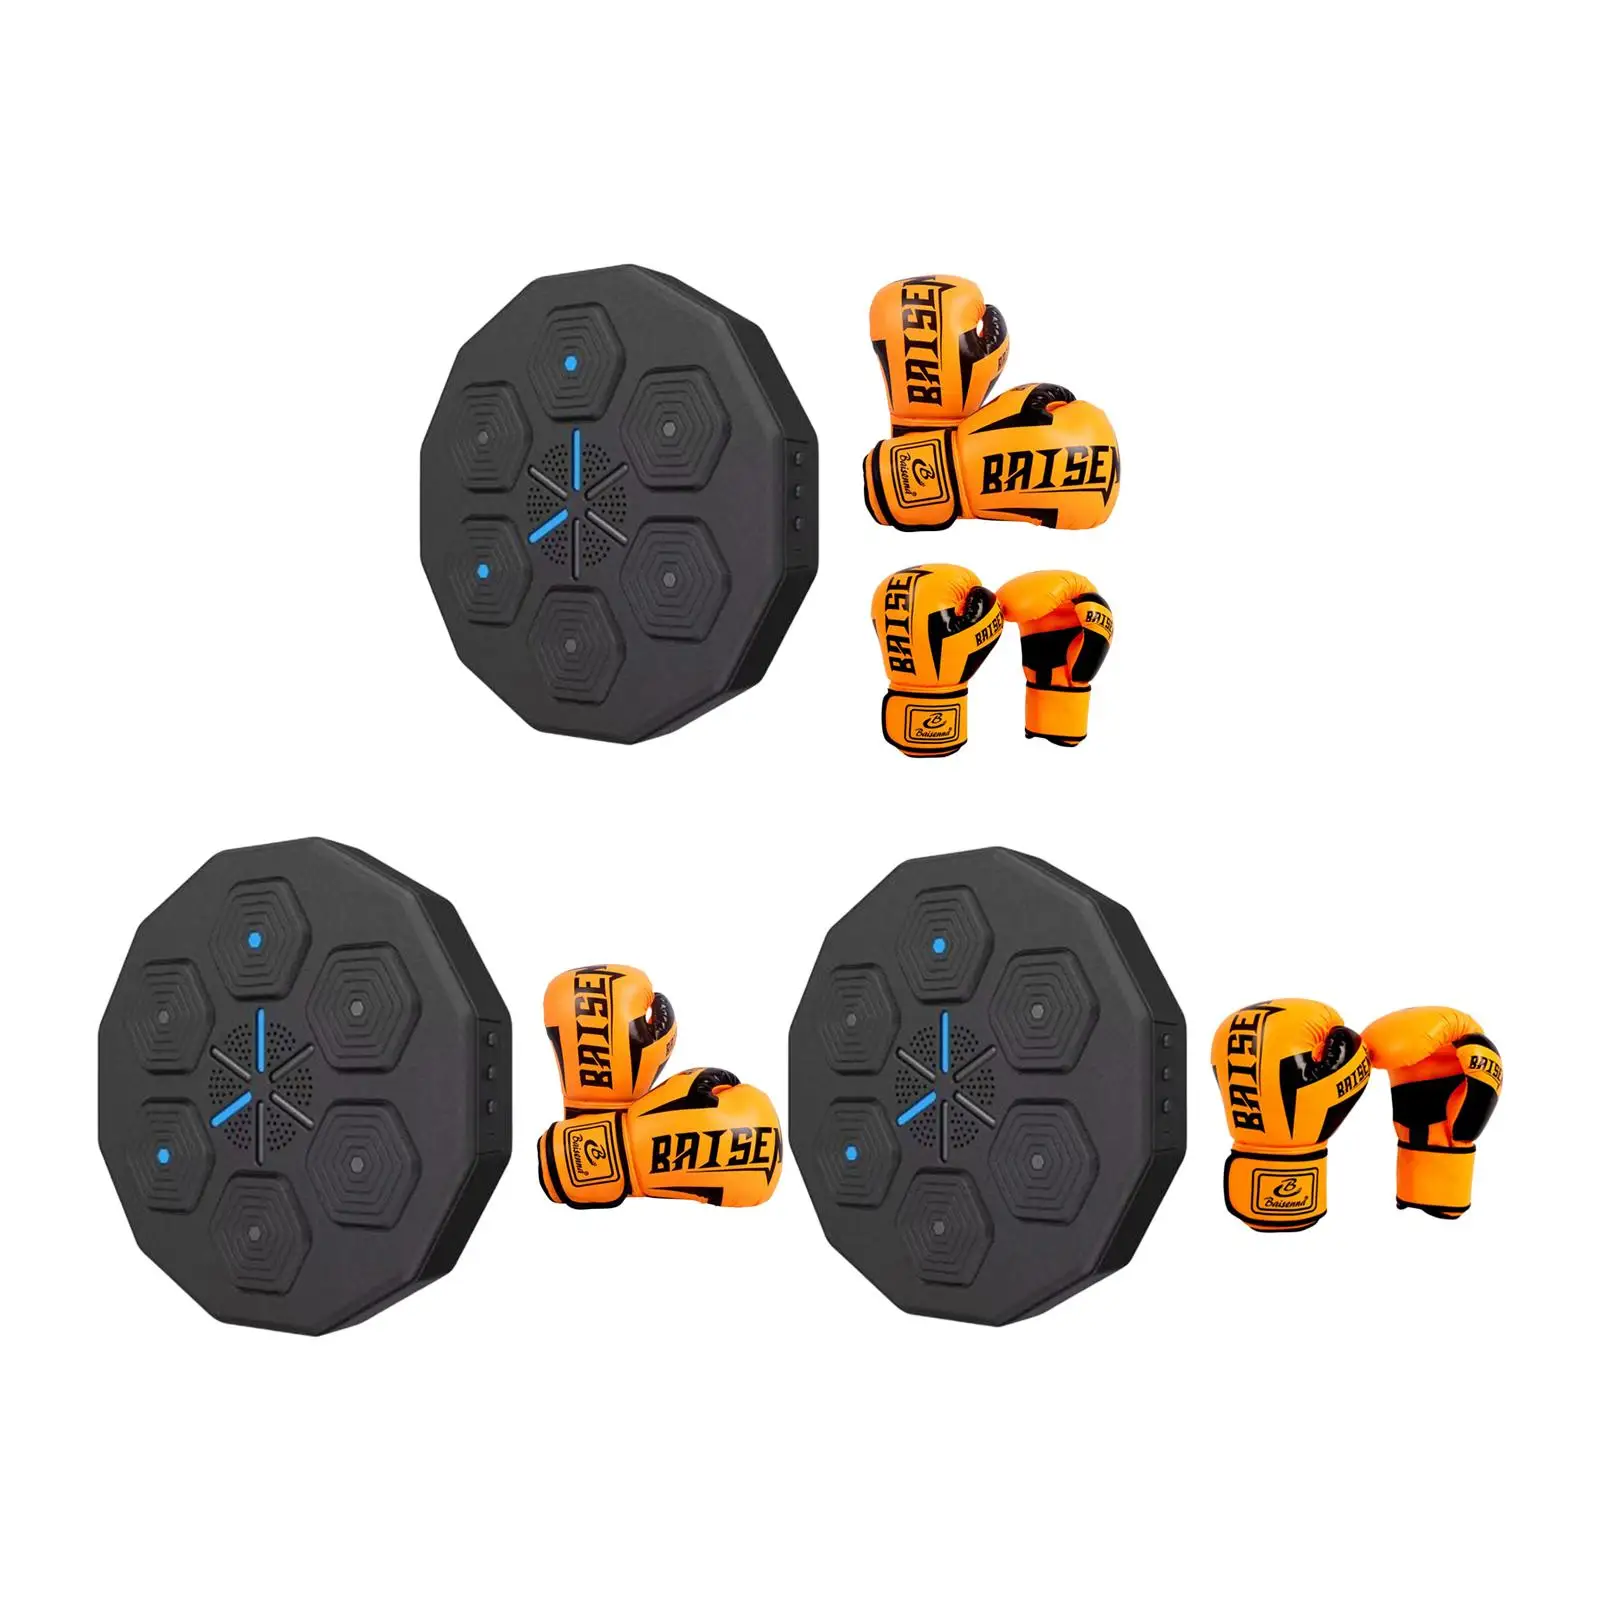 Electronic Music Boxing Wall Target Wall Mount Household with Gloves Reaction Target Rhythm Wall Target for Exercise Home Indoor